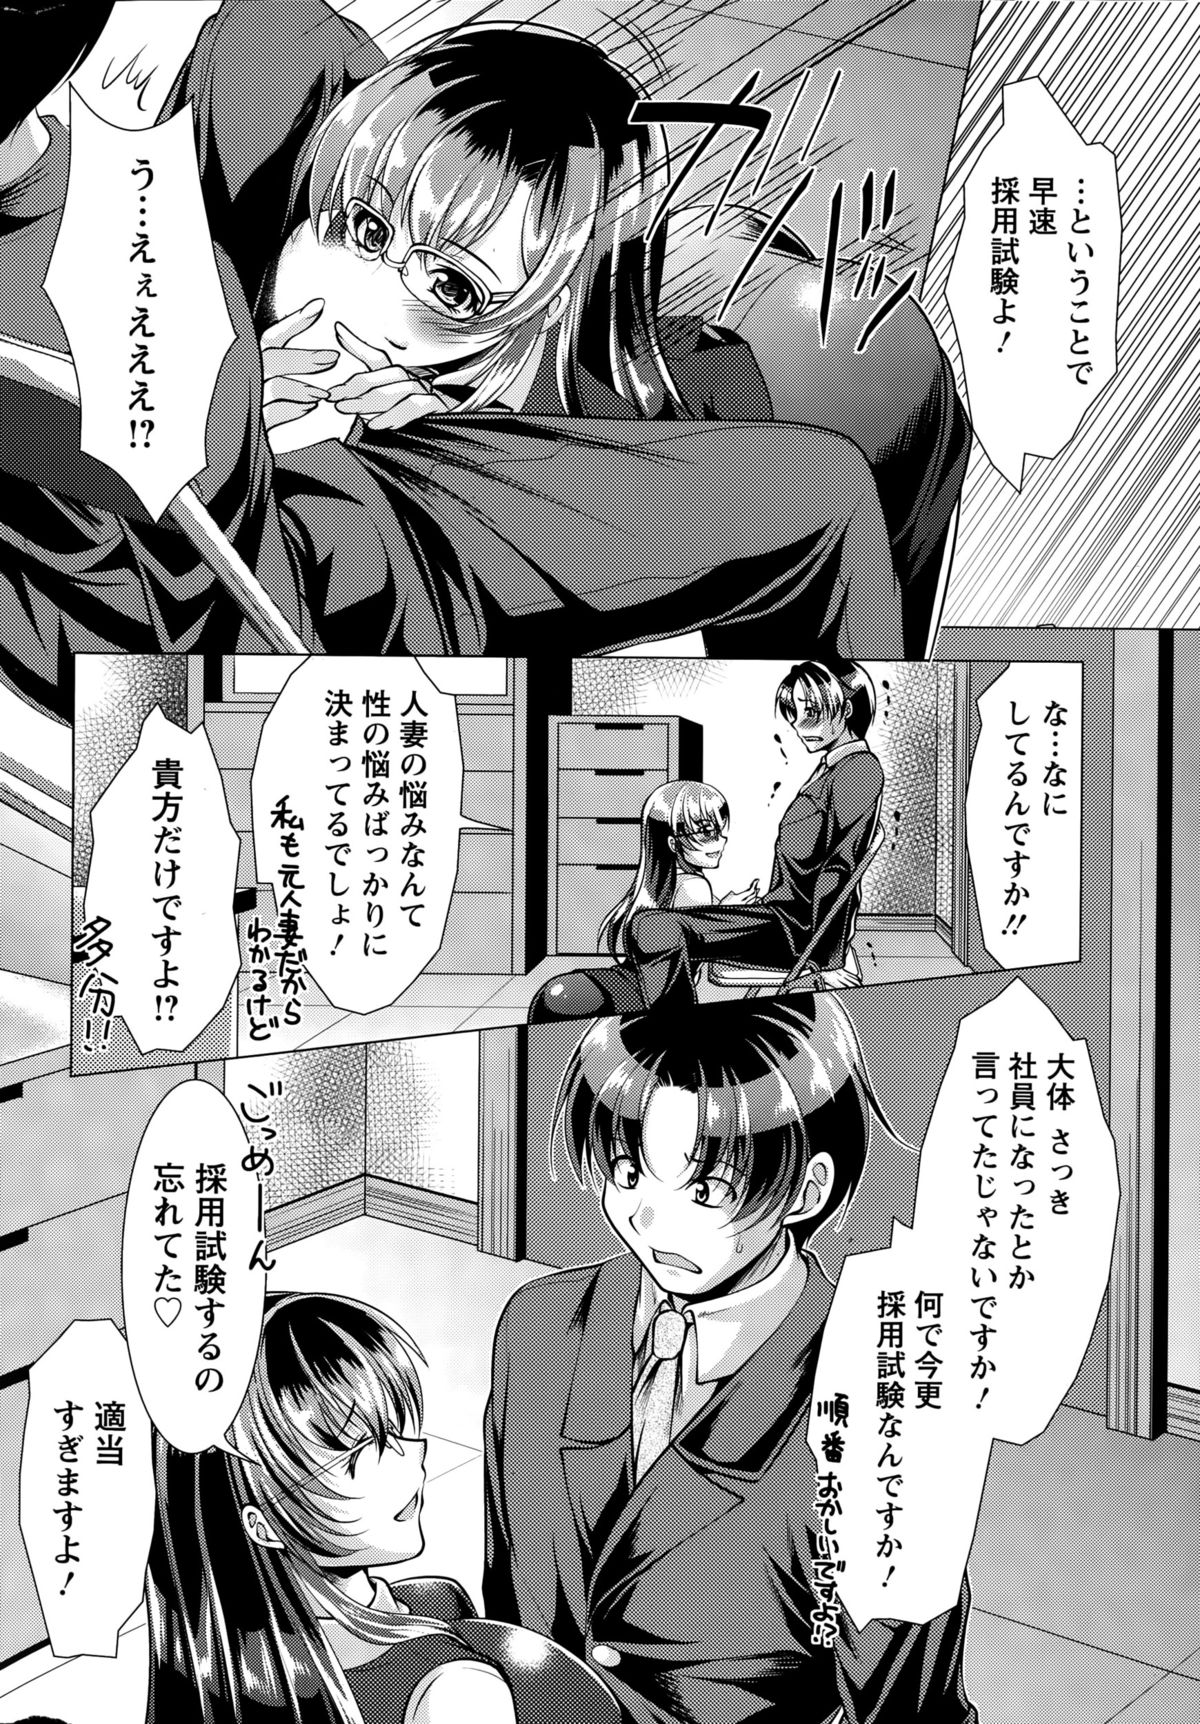 Action Pizazz 2015-10 page 10 full